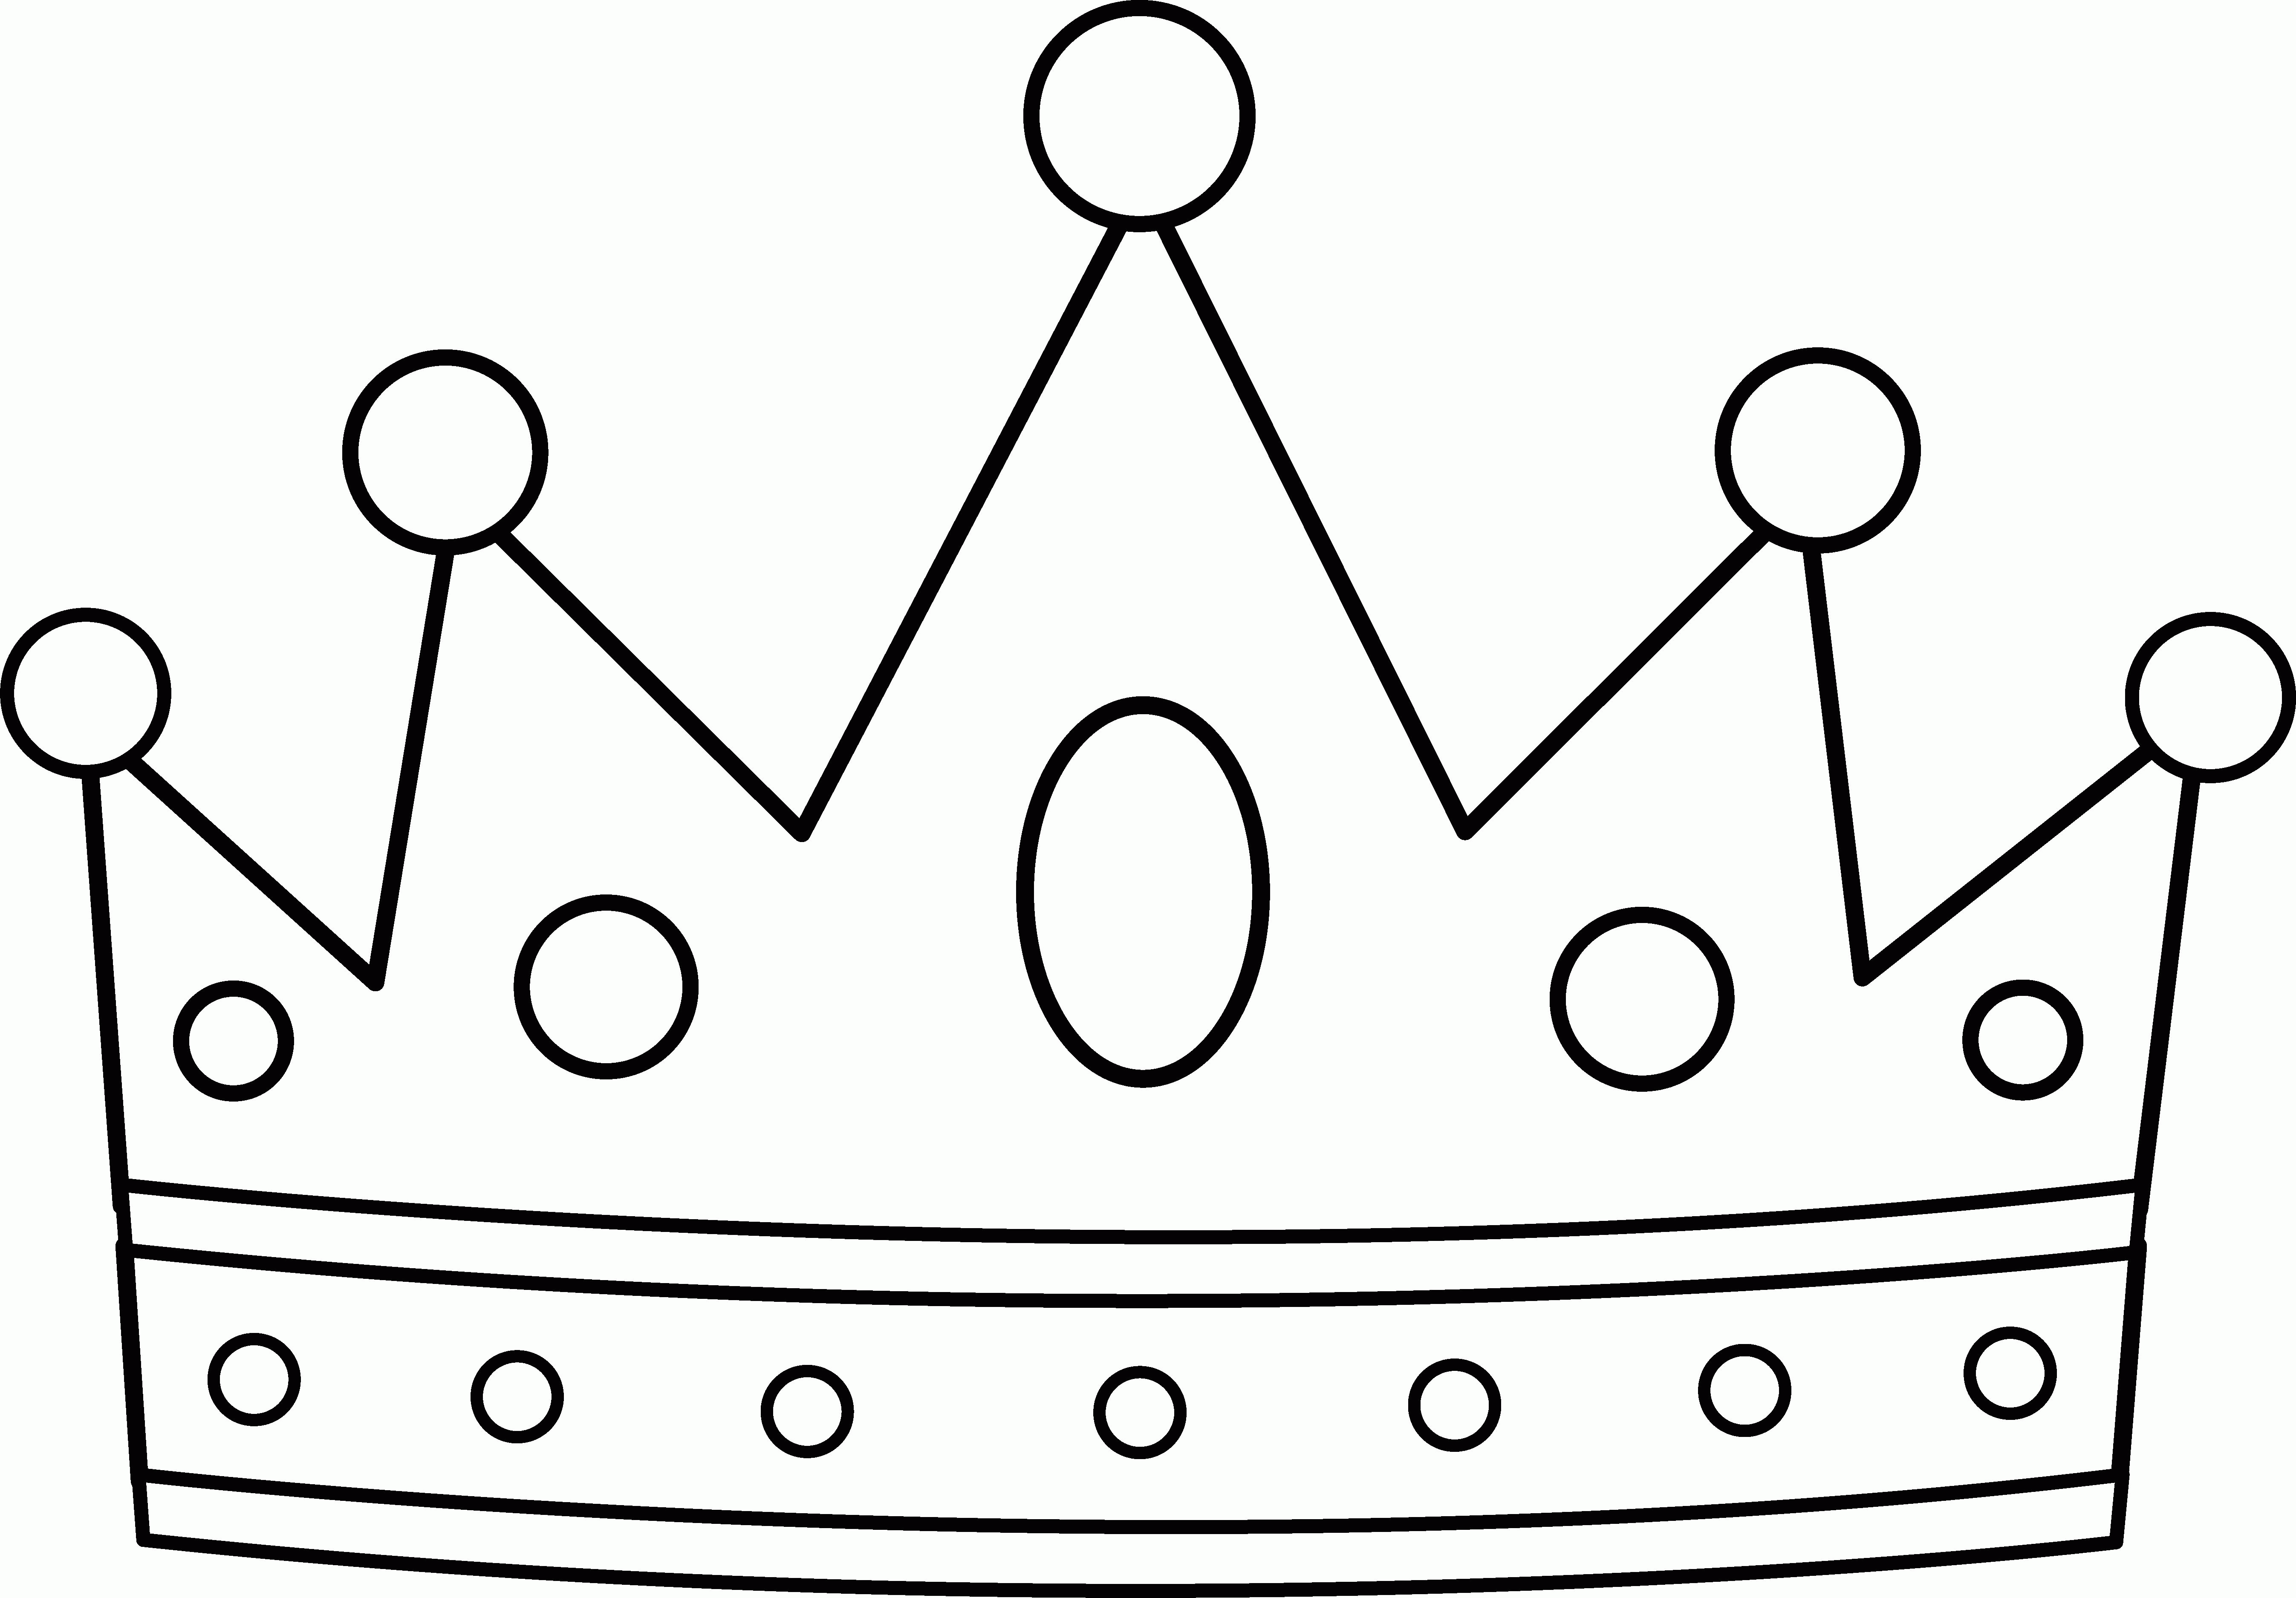 King Crowns Coloring Pages